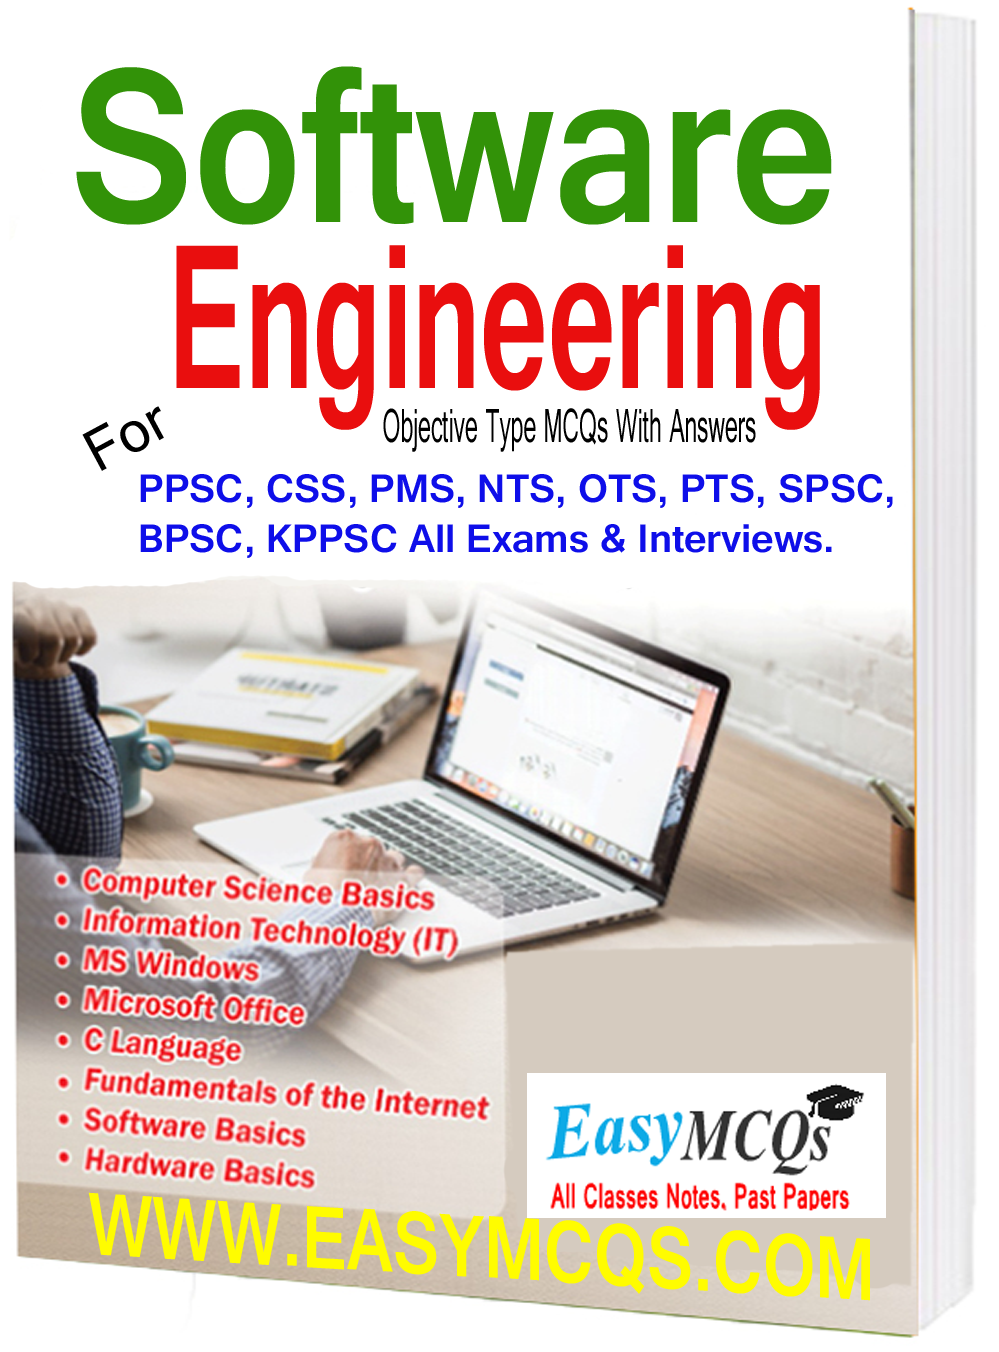 assignment for software engineering